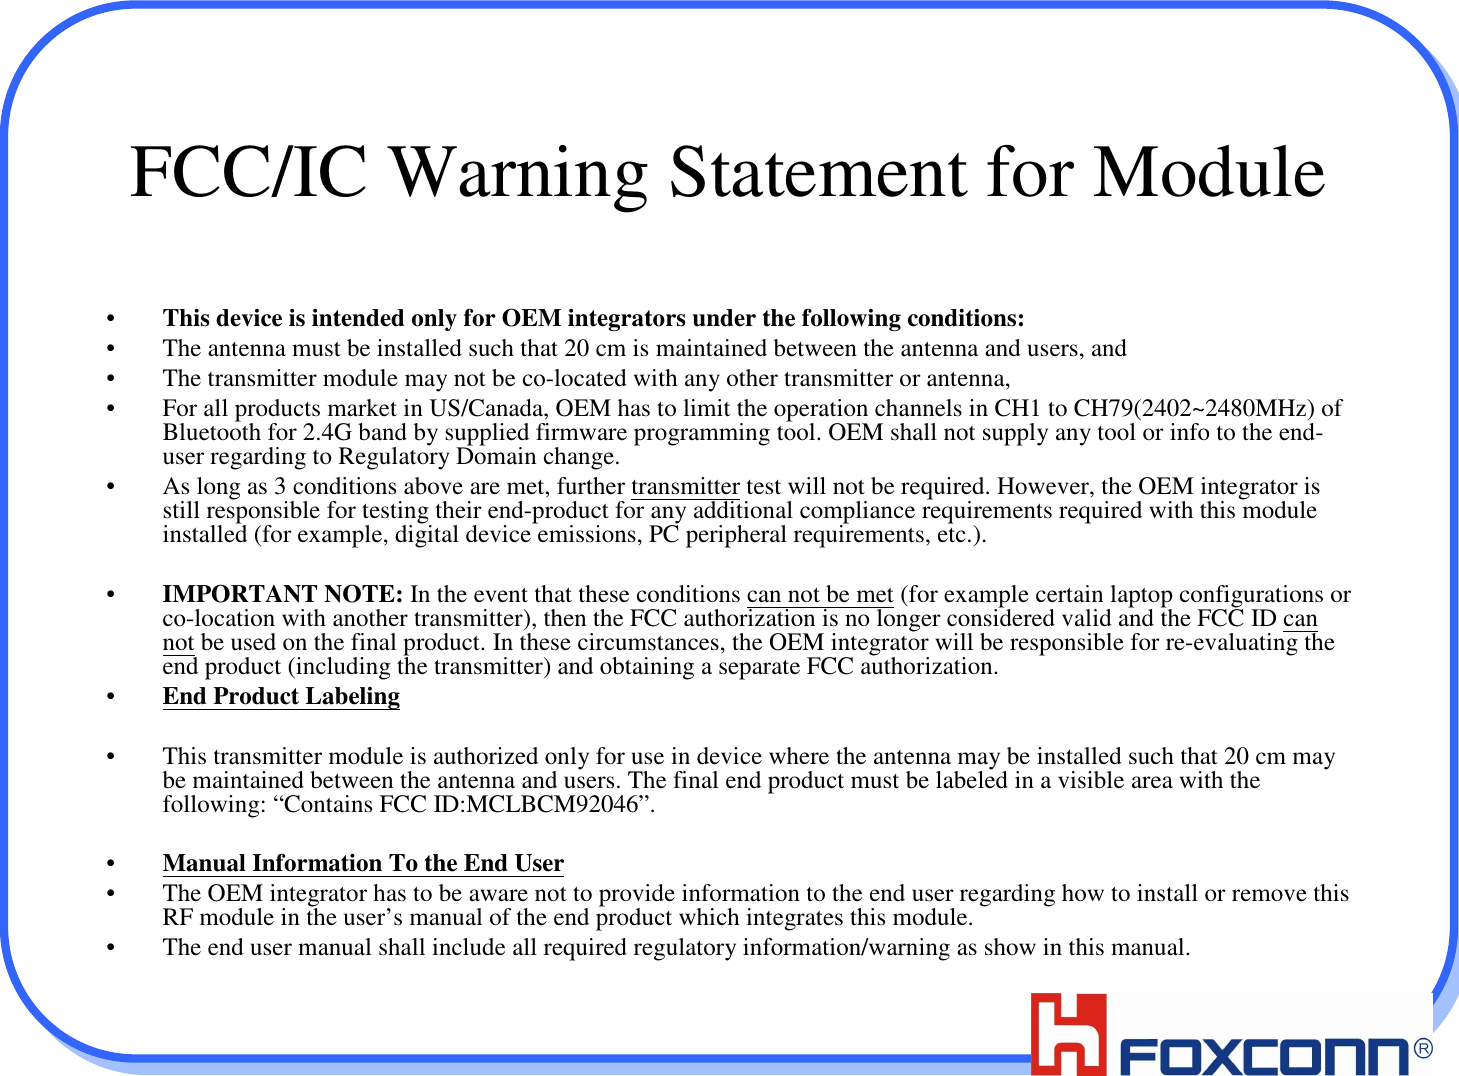 3FCC/IC Warning Statement for Module•This device is intended only for OEM integrators under the following conditions:• The antenna must be installed such that 20 cm is maintained between the antenna and users, and • The transmitter module may not be co-located with any other transmitter or antenna, • For all products market in US/Canada, OEM has to limit the operation channels in CH1 to CH79(2402~2480MHz) of Bluetooth for 2.4G band by supplied firmware programming tool. OEM shall not supply any tool or info to the end-user regarding to Regulatory Domain change.• As long as 3 conditions above are met, further transmitter test will not be required. However, the OEM integrator is still responsible for testing their end-product for any additional compliance requirements required with this module installed (for example, digital device emissions, PC peripheral requirements, etc.).•IMPORTANT NOTE: In the event that these conditions can not be met (for example certain laptop configurations or co-location with another transmitter), then the FCC authorization is no longer considered valid and the FCC ID can not be used on the final product. In these circumstances, the OEM integrator will be responsible for re-evaluating the end product (including the transmitter) and obtaining a separate FCC authorization.•End Product Labeling• This transmitter module is authorized only for use in device where the antenna may be installed such that 20 cm may be maintained between the antenna and users. The final end product must be labeled in a visible area with the following: “Contains FCC ID:MCLBCM92046”.•Manual Information To the End User• The OEM integrator has to be aware not to provide information to the end user regarding how to install or remove this RF module in the user’s manual of the end product which integrates this module.• The end user manual shall include all required regulatory information/warning as show in this manual.